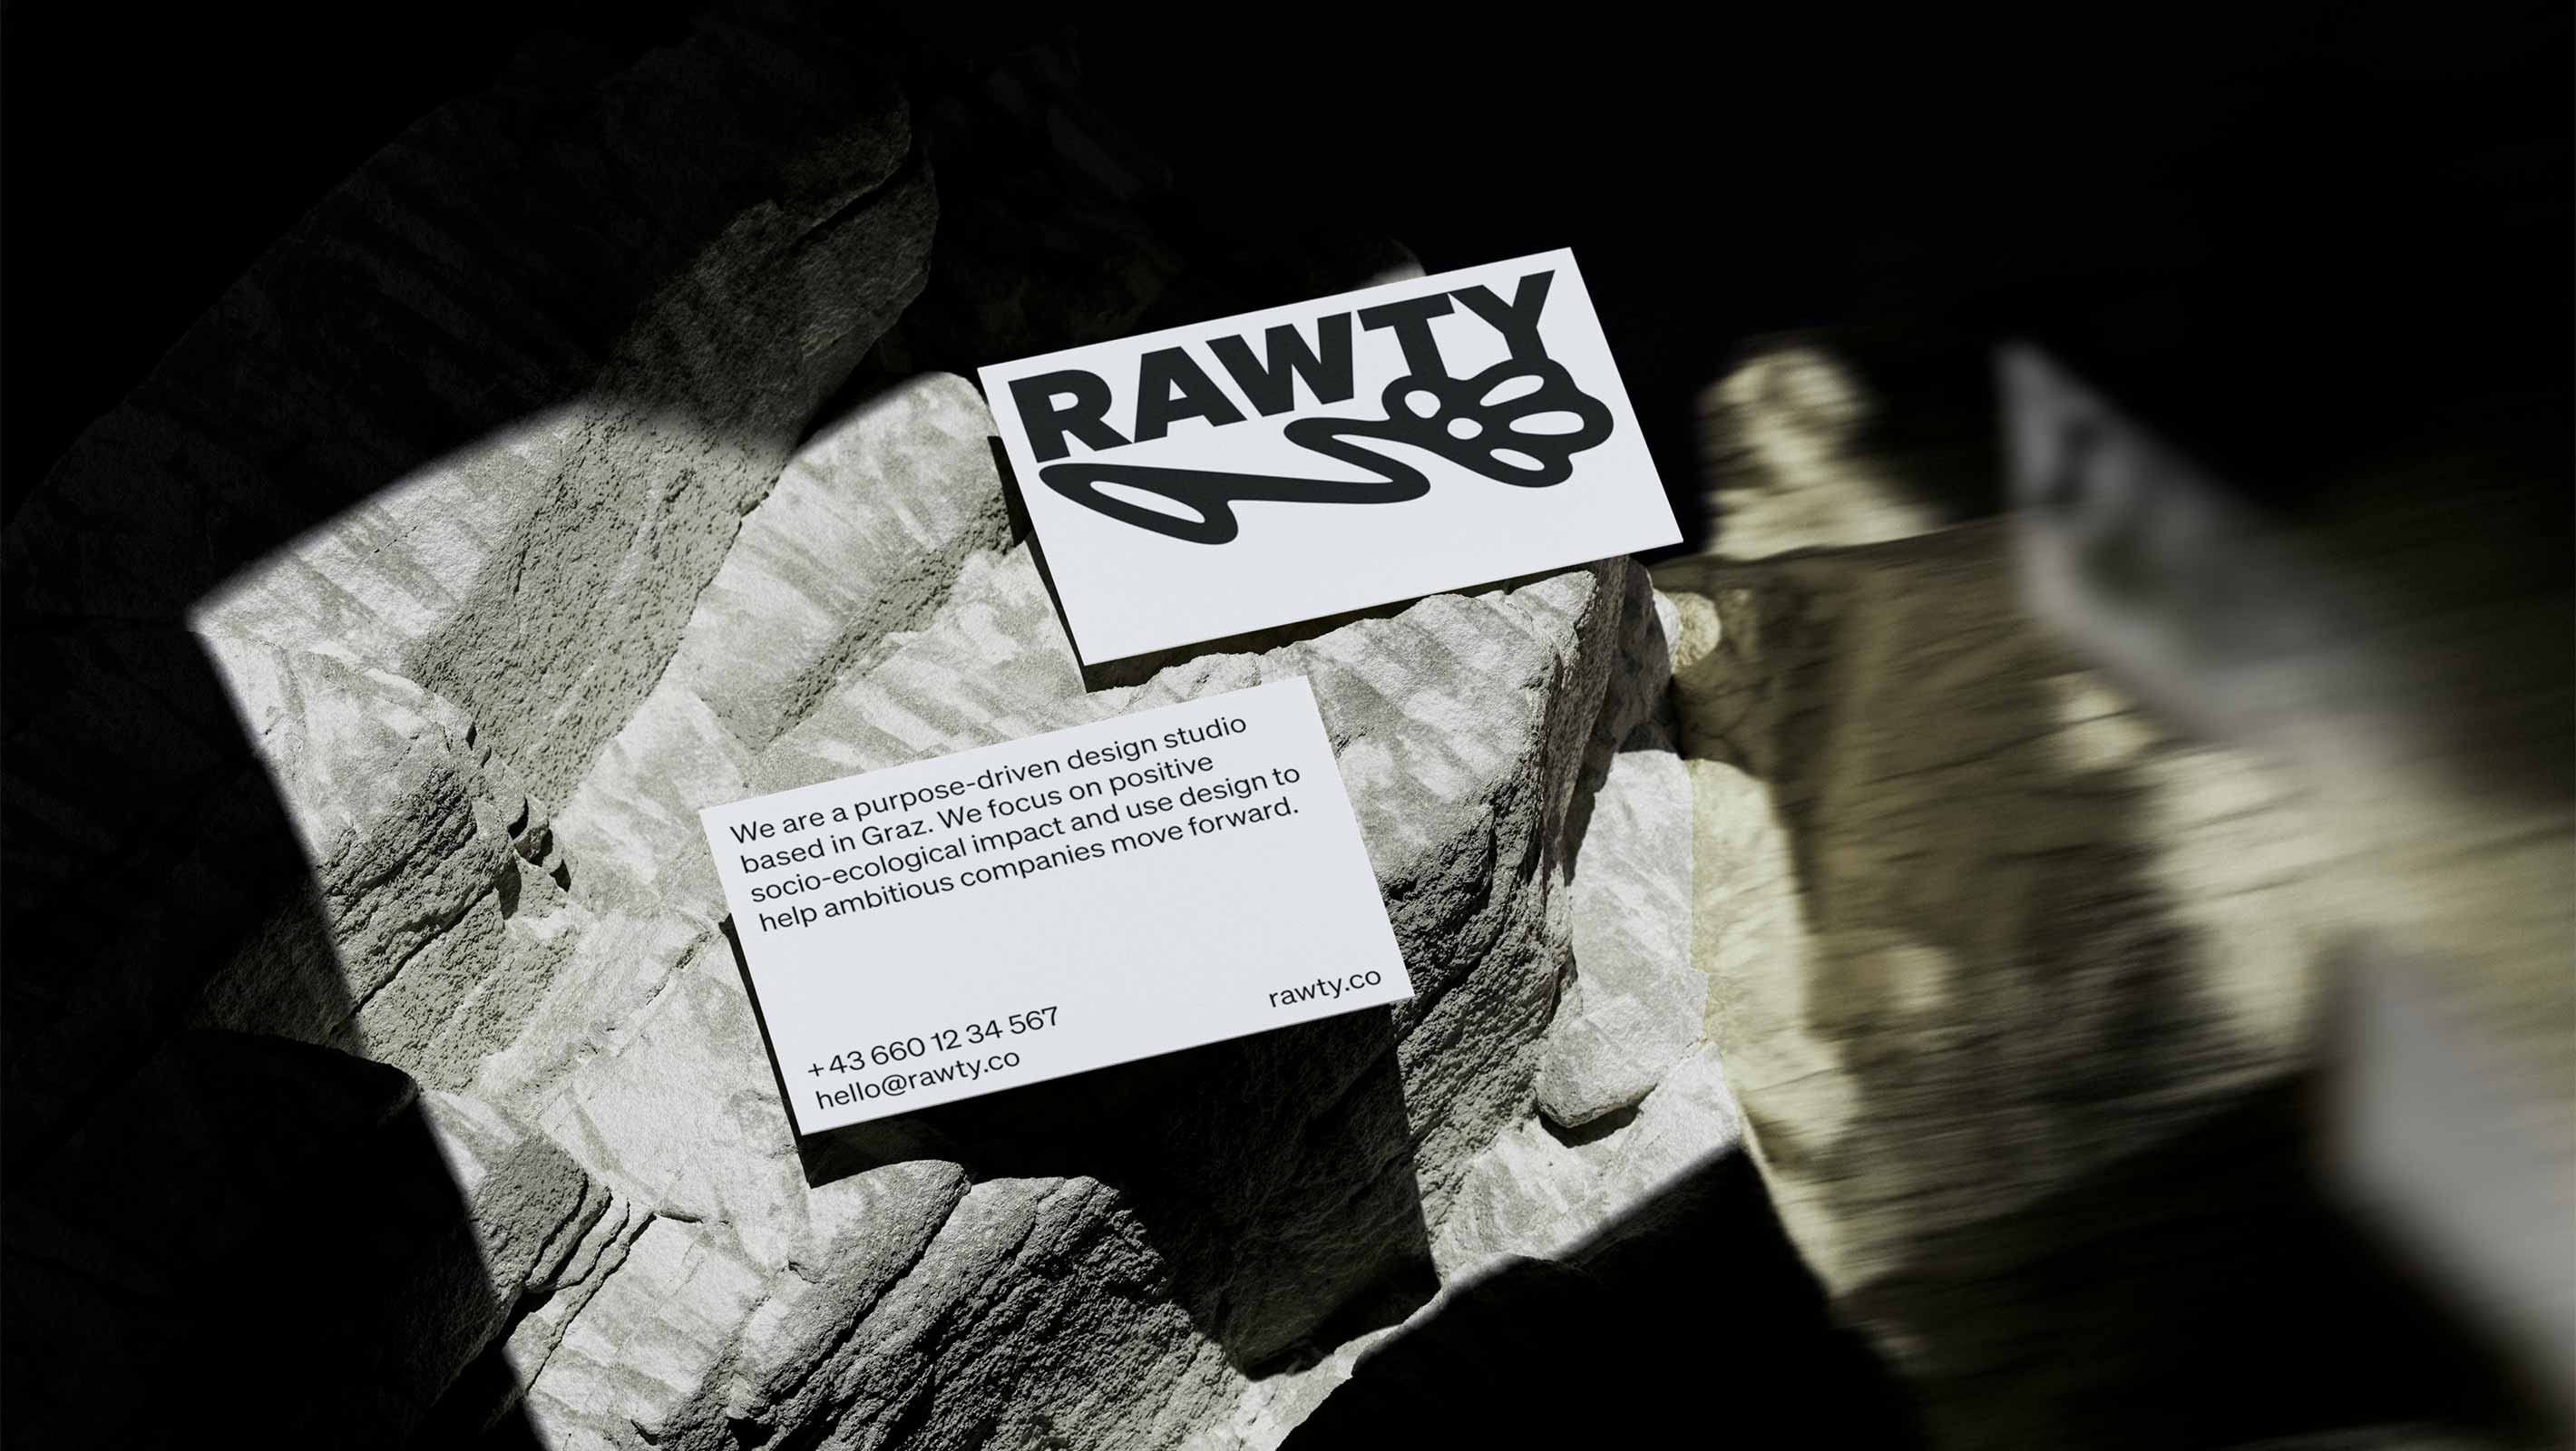 Business card of RAWTY on a stone in harsh sunlight and shadows with reflections on the right side.